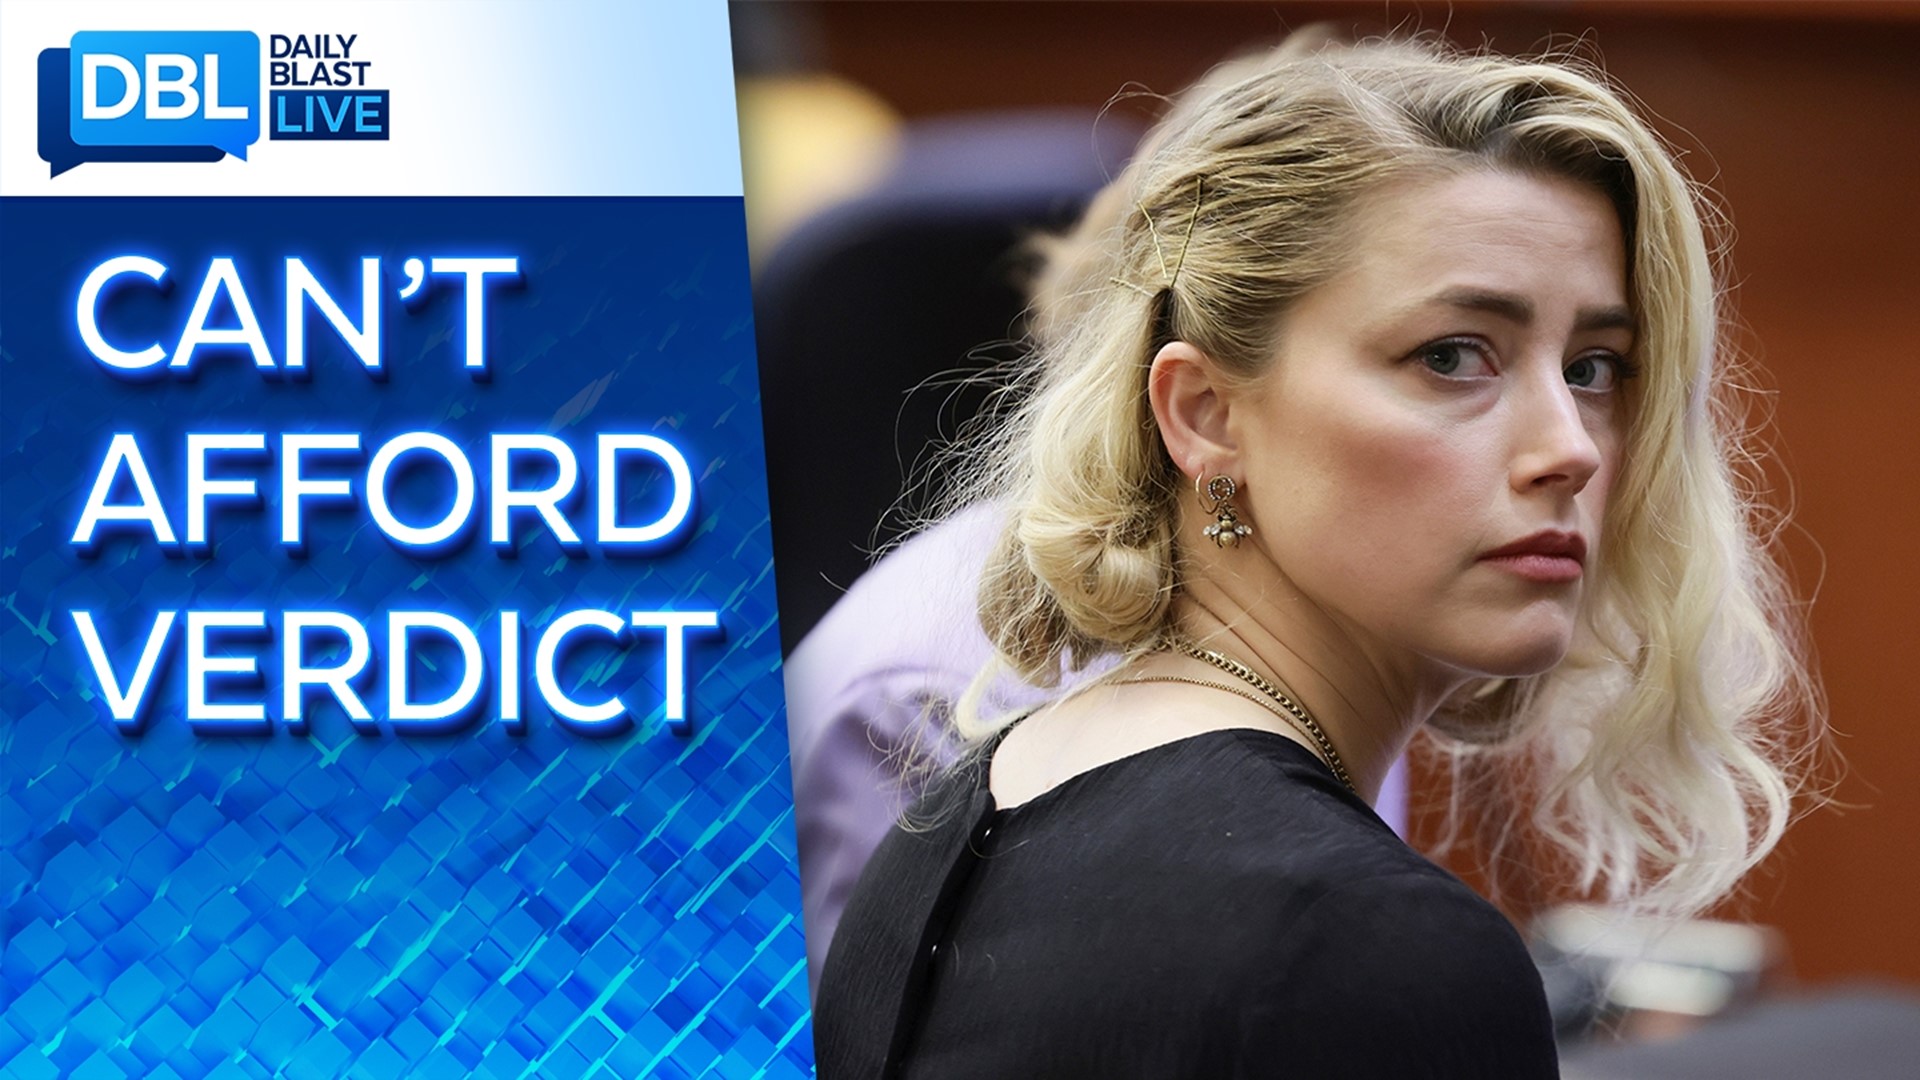 After the long-awaited verdict in the Johnny Depp-Amber Heard trial went the way of public opinion in favor of Depp, Heard's attorney says she is planning to appeal.